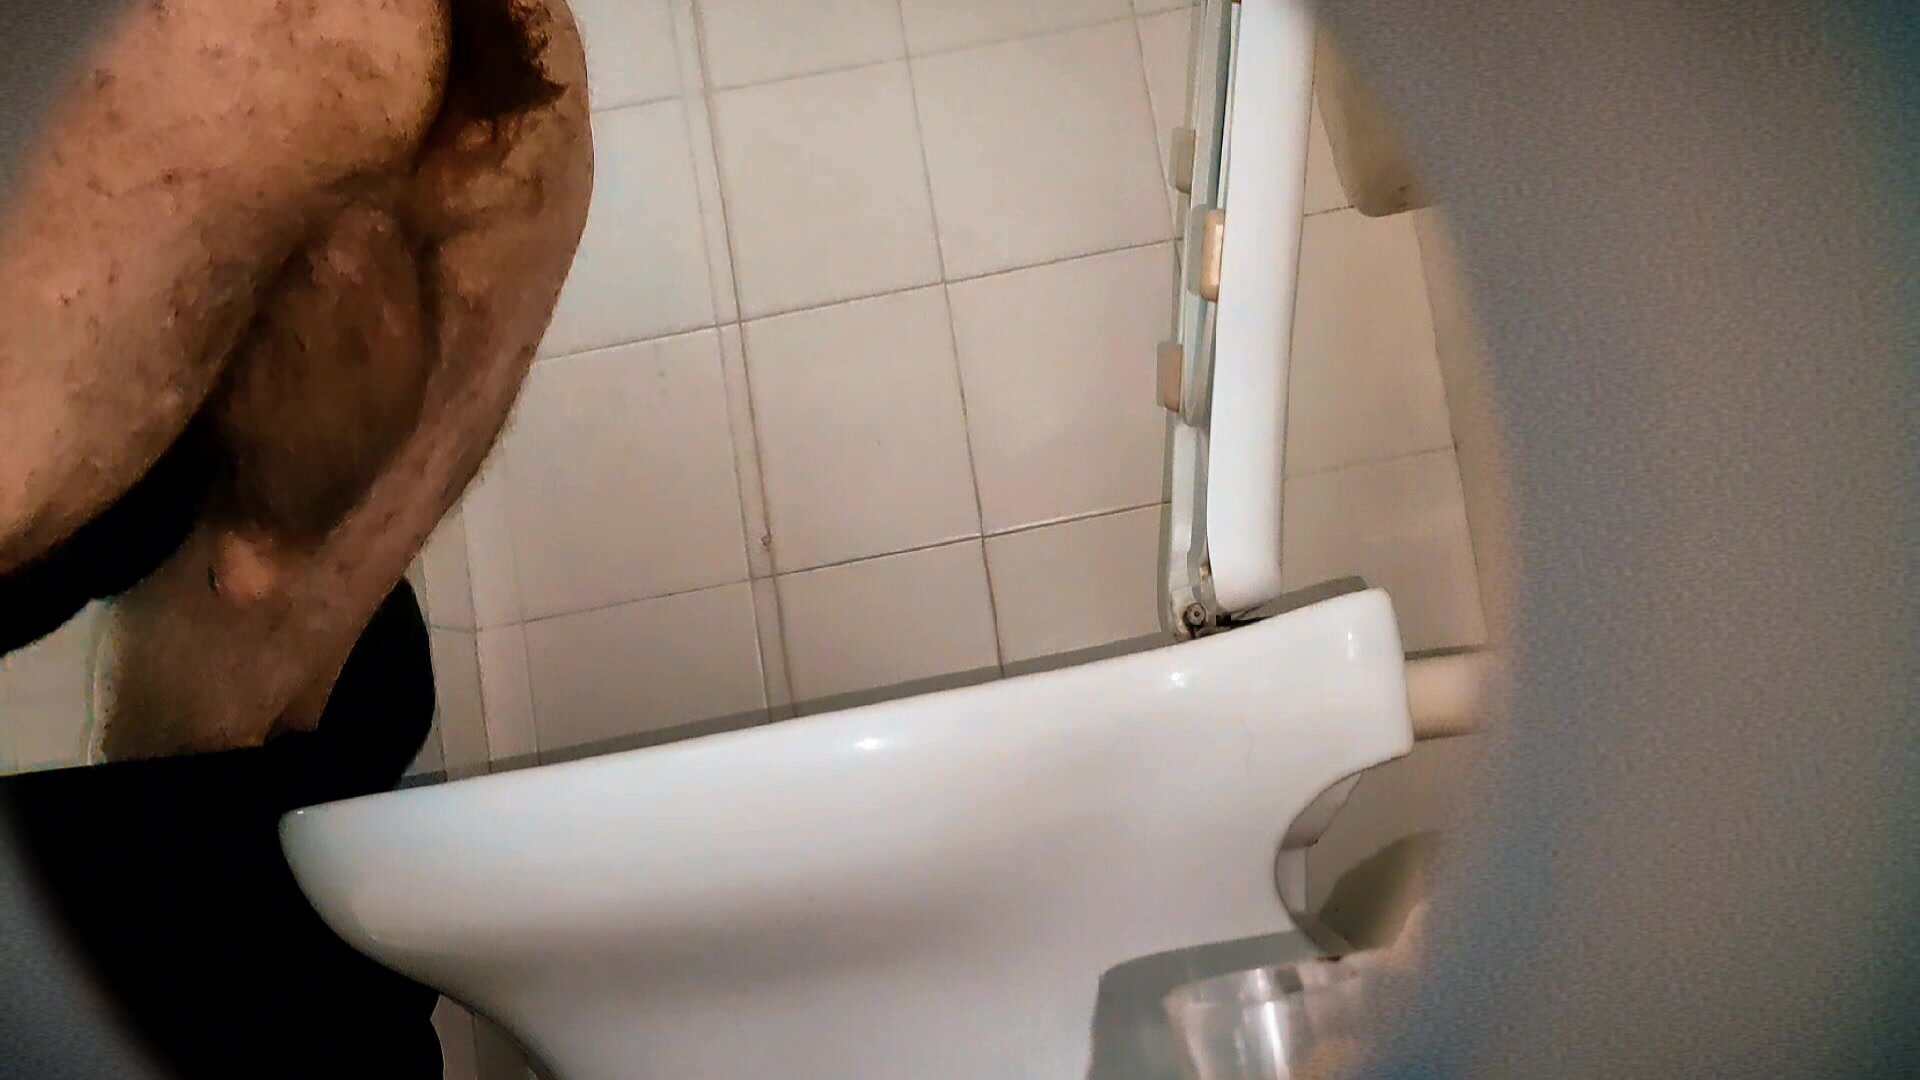 Hairy guy with big balls caught in the bathroom